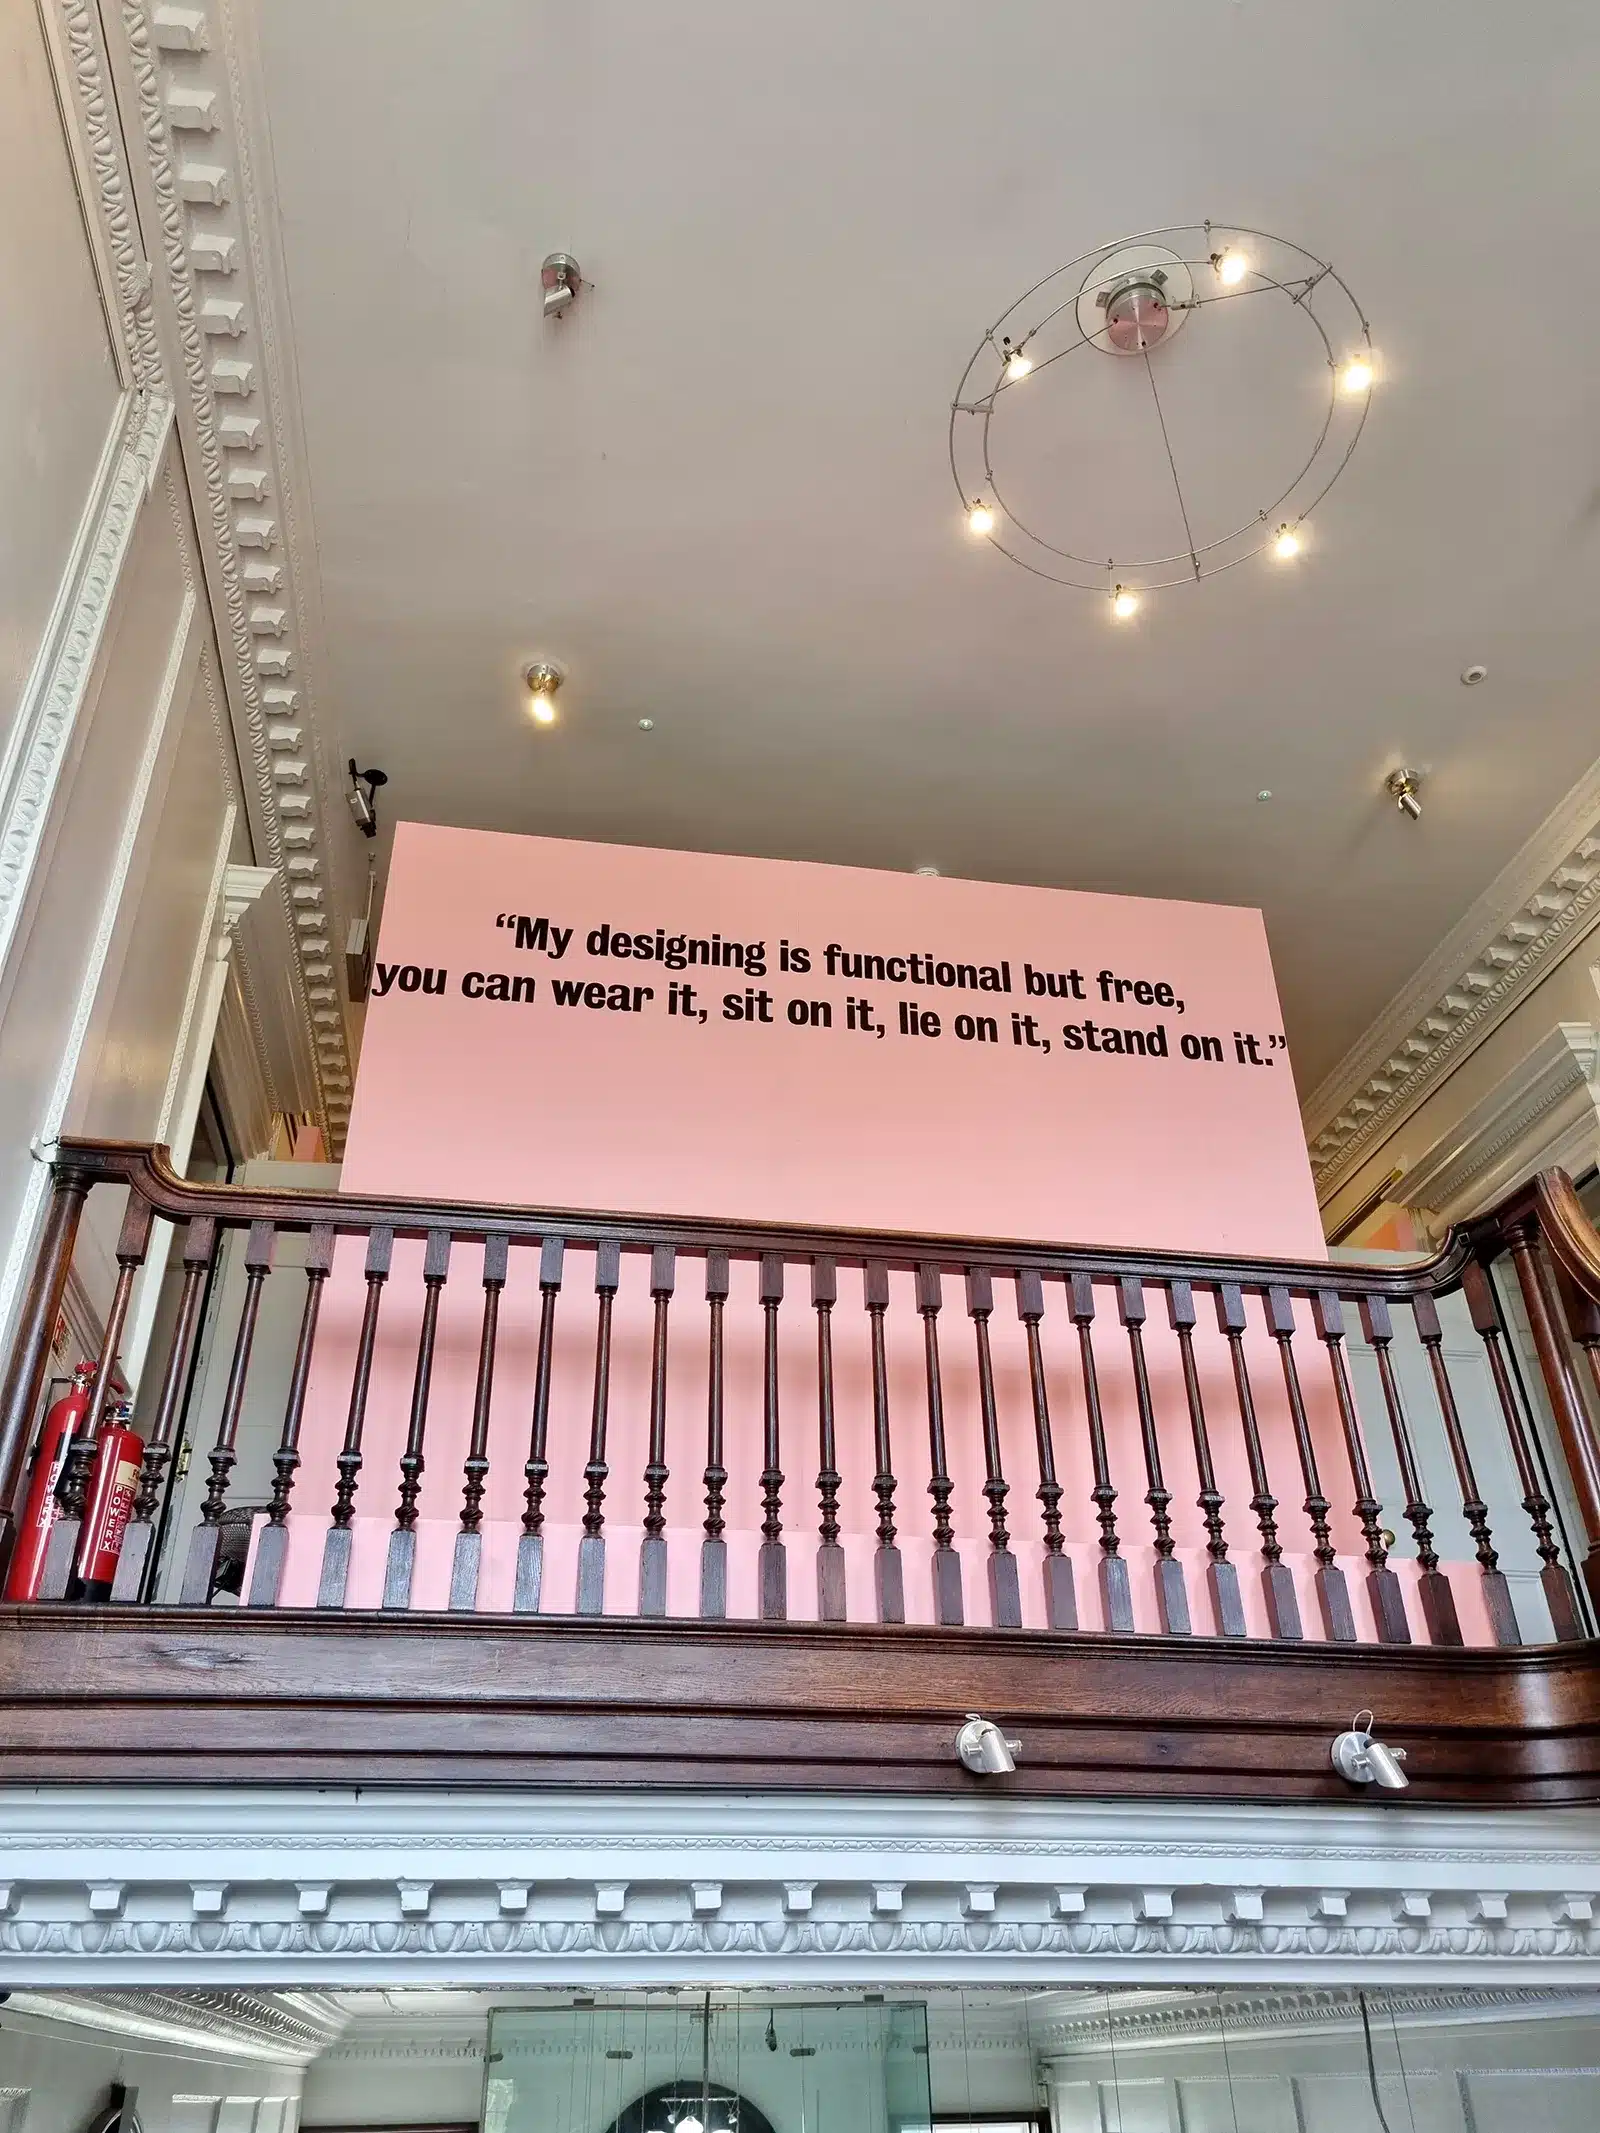 A room with a pink railing and a quote on the wall.